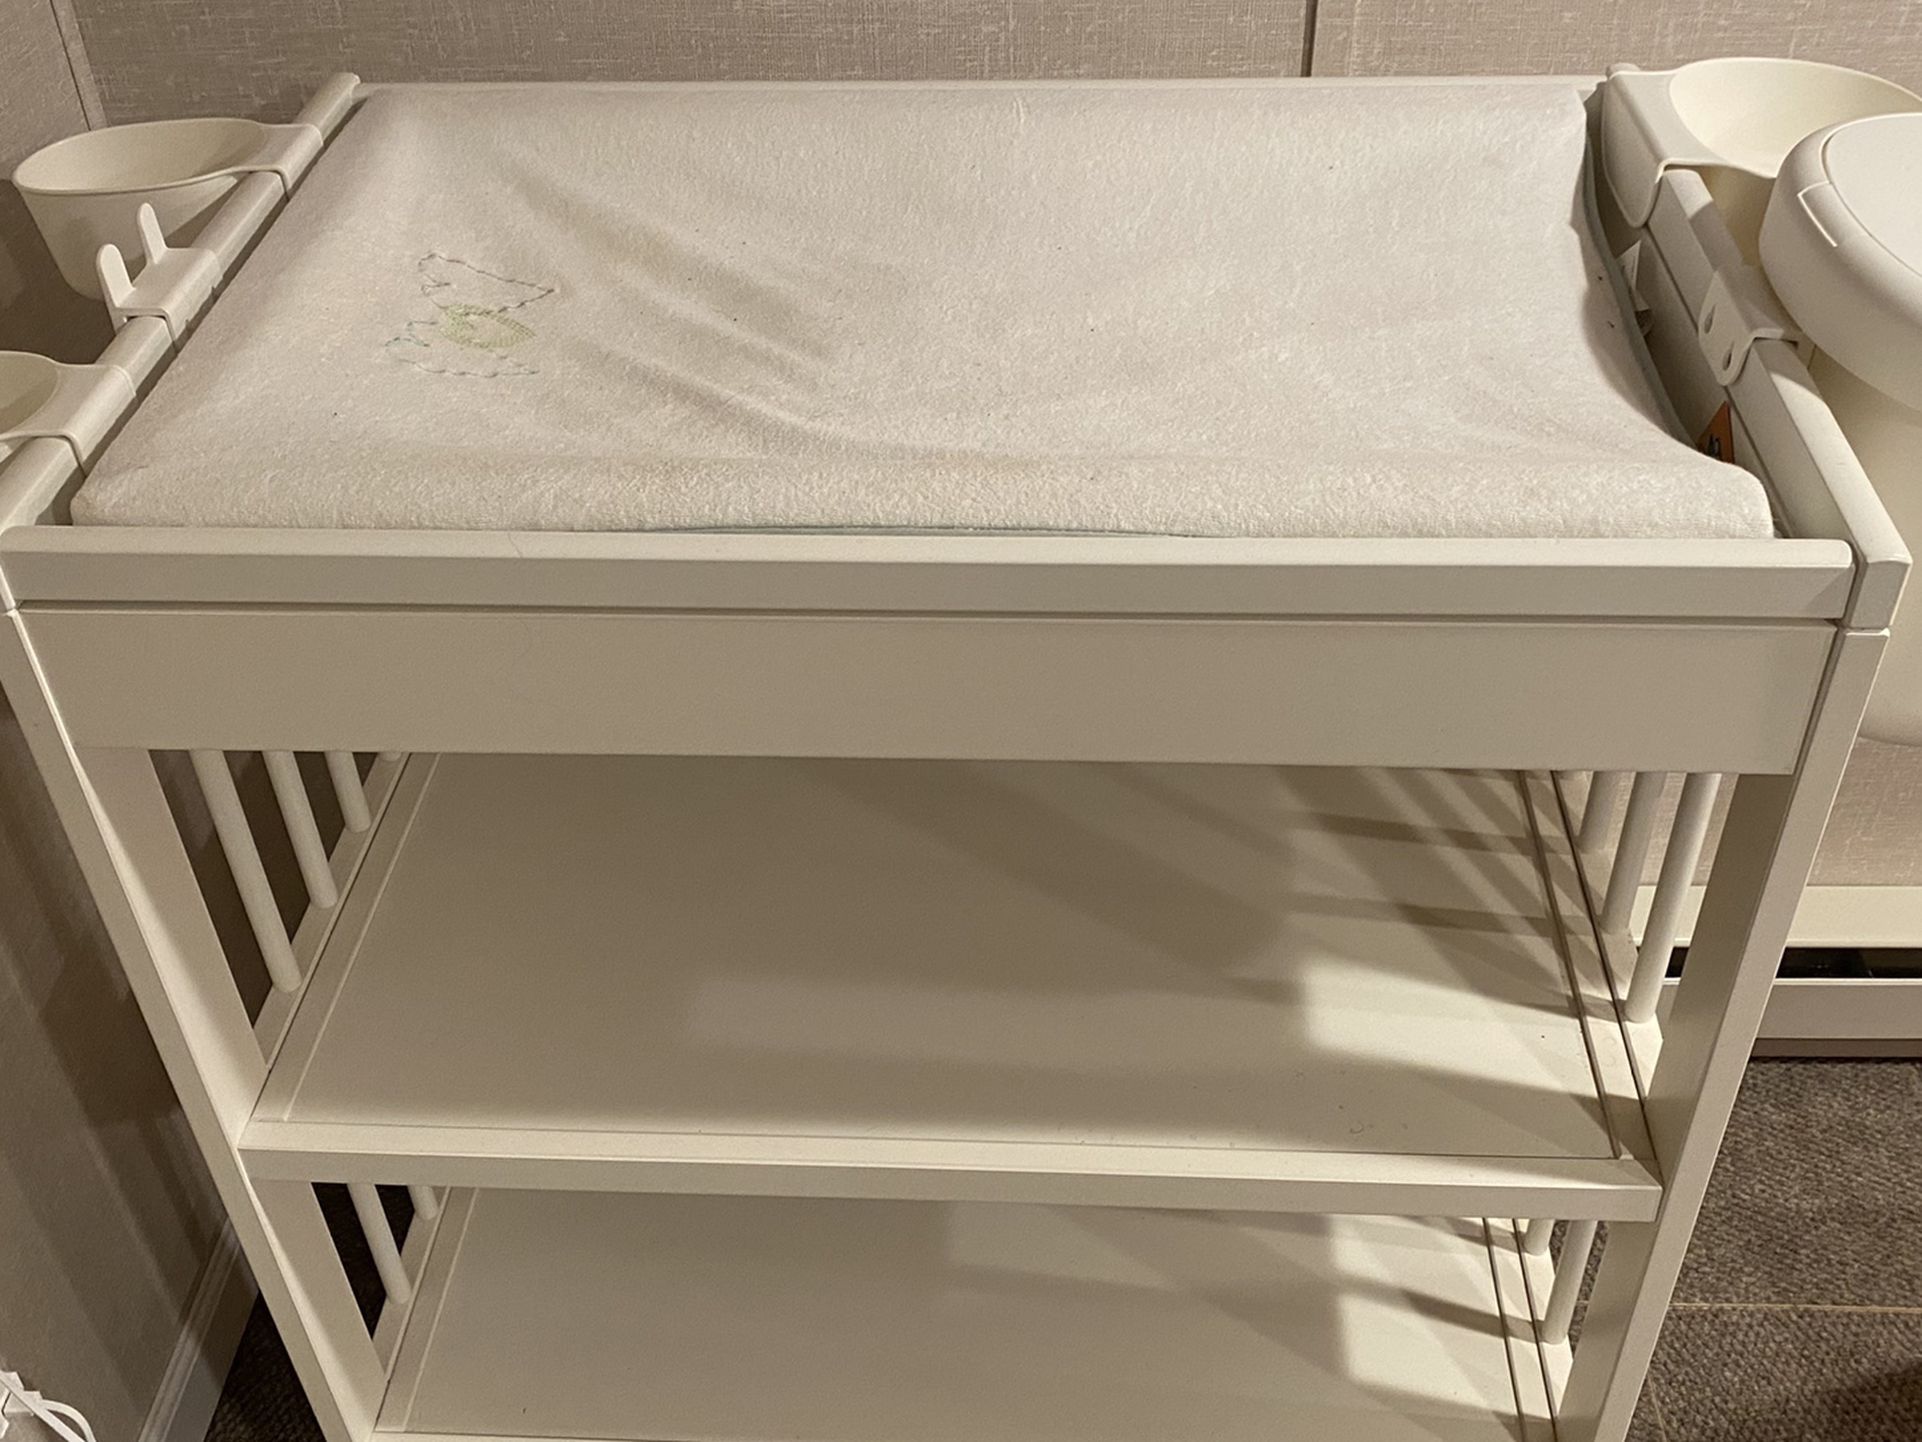 Ikea Baby Changing Table With Bins